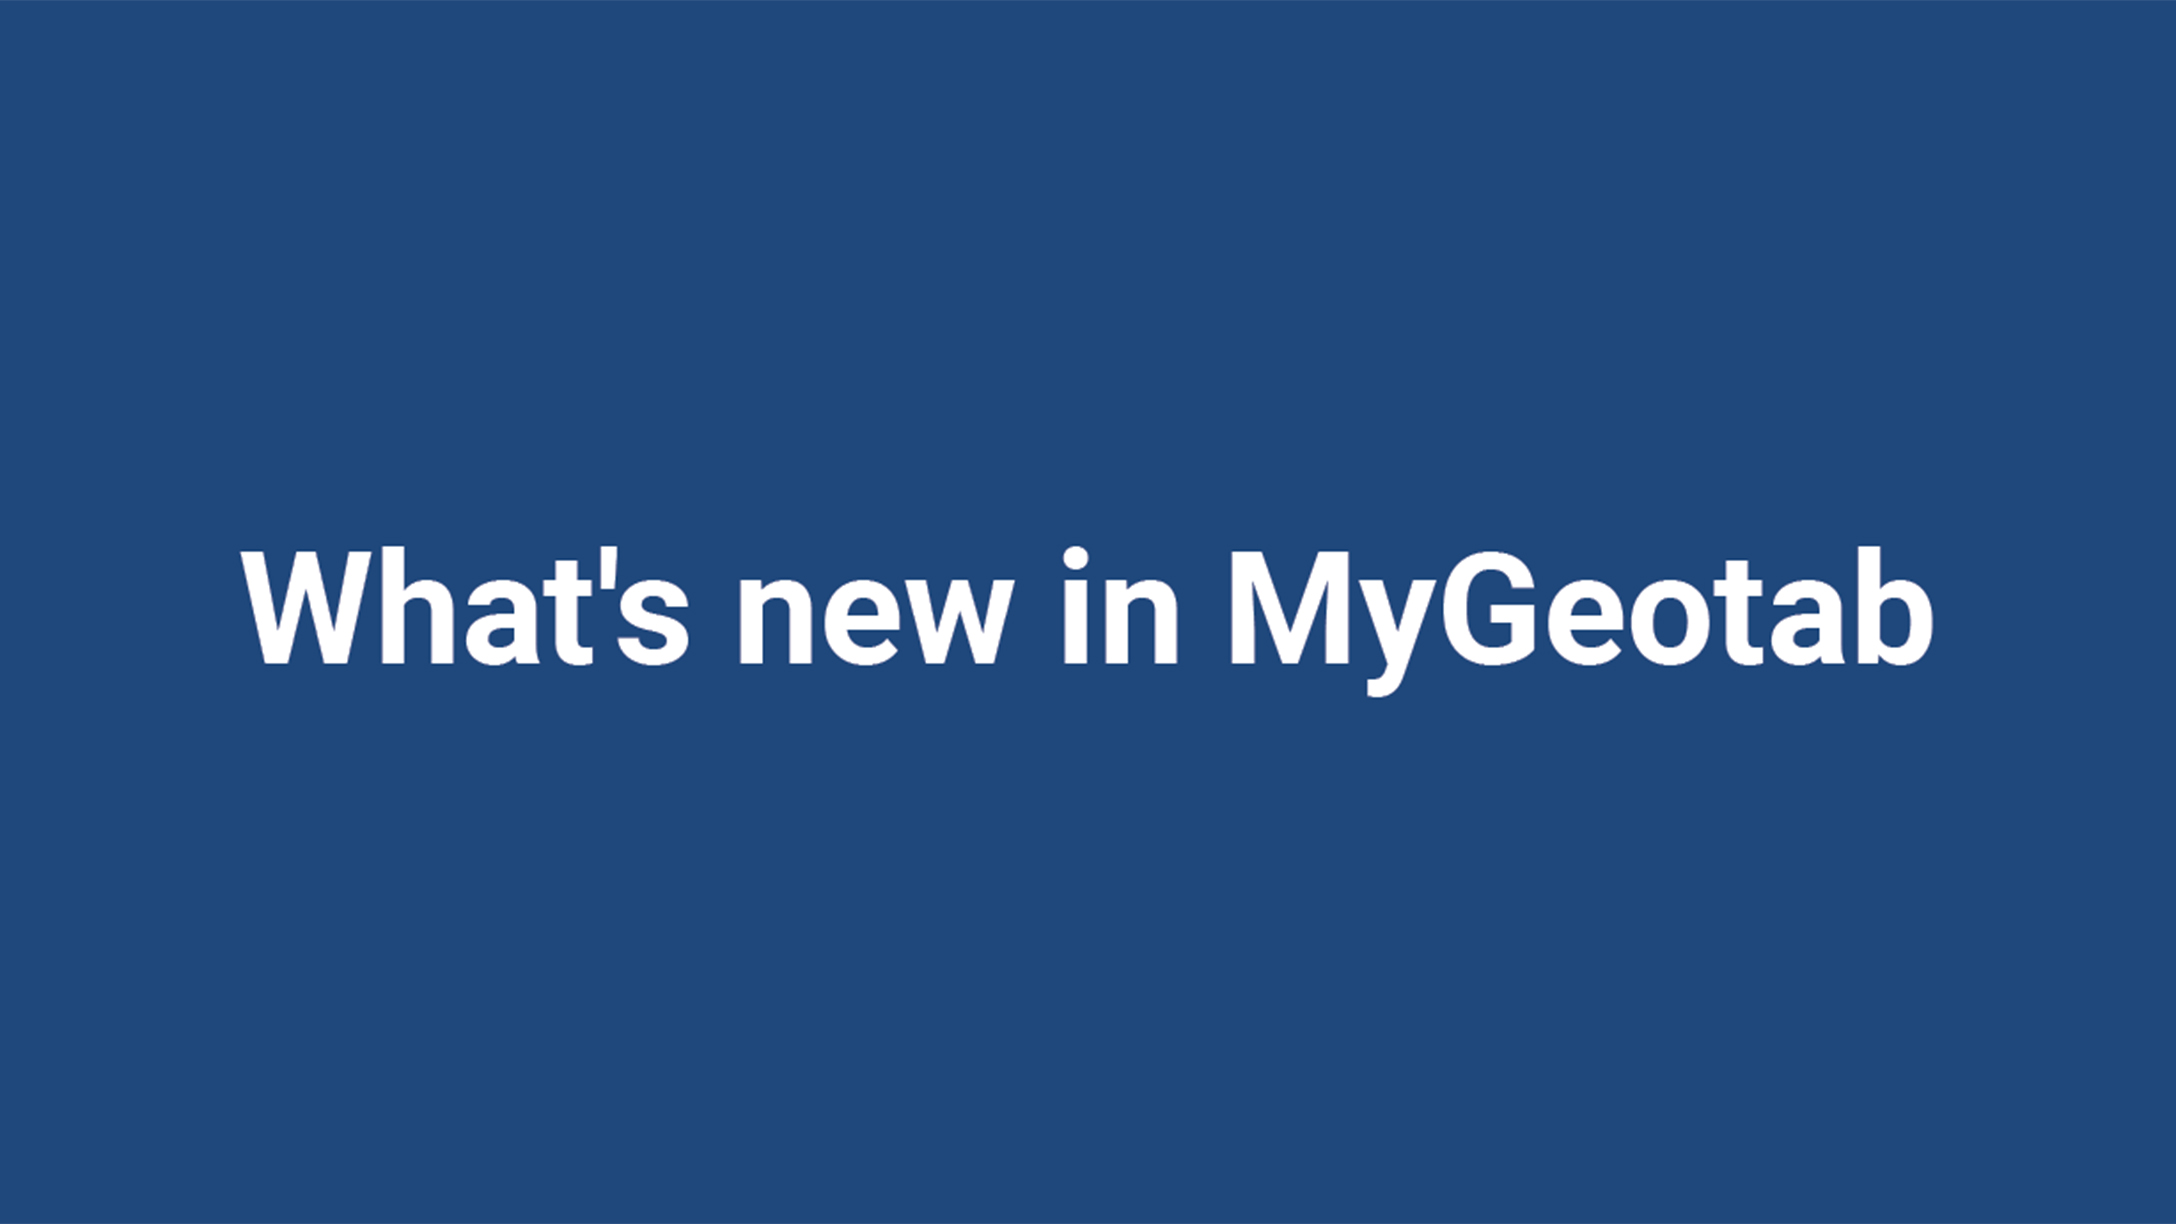 white text on blue background saying "what's new in mygeotab"